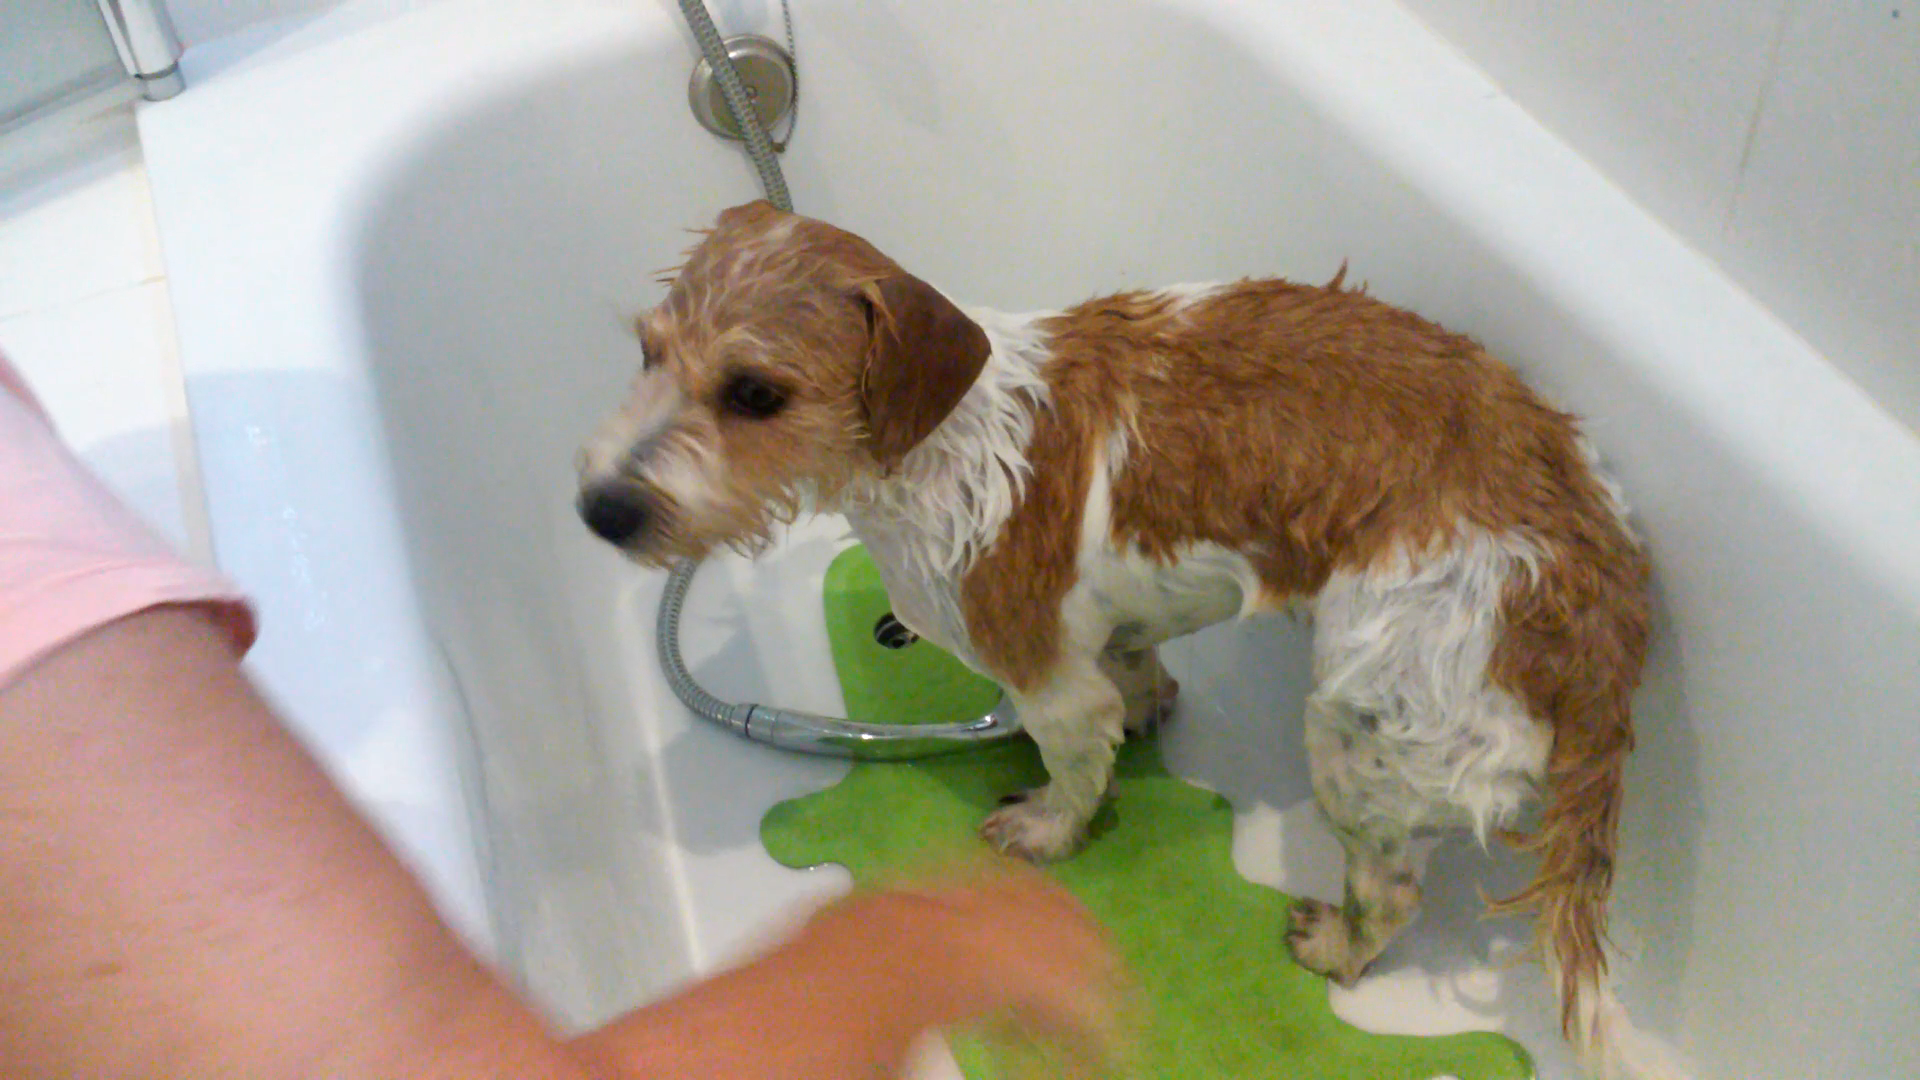 Showering the dog – Jenson is funny afterwards